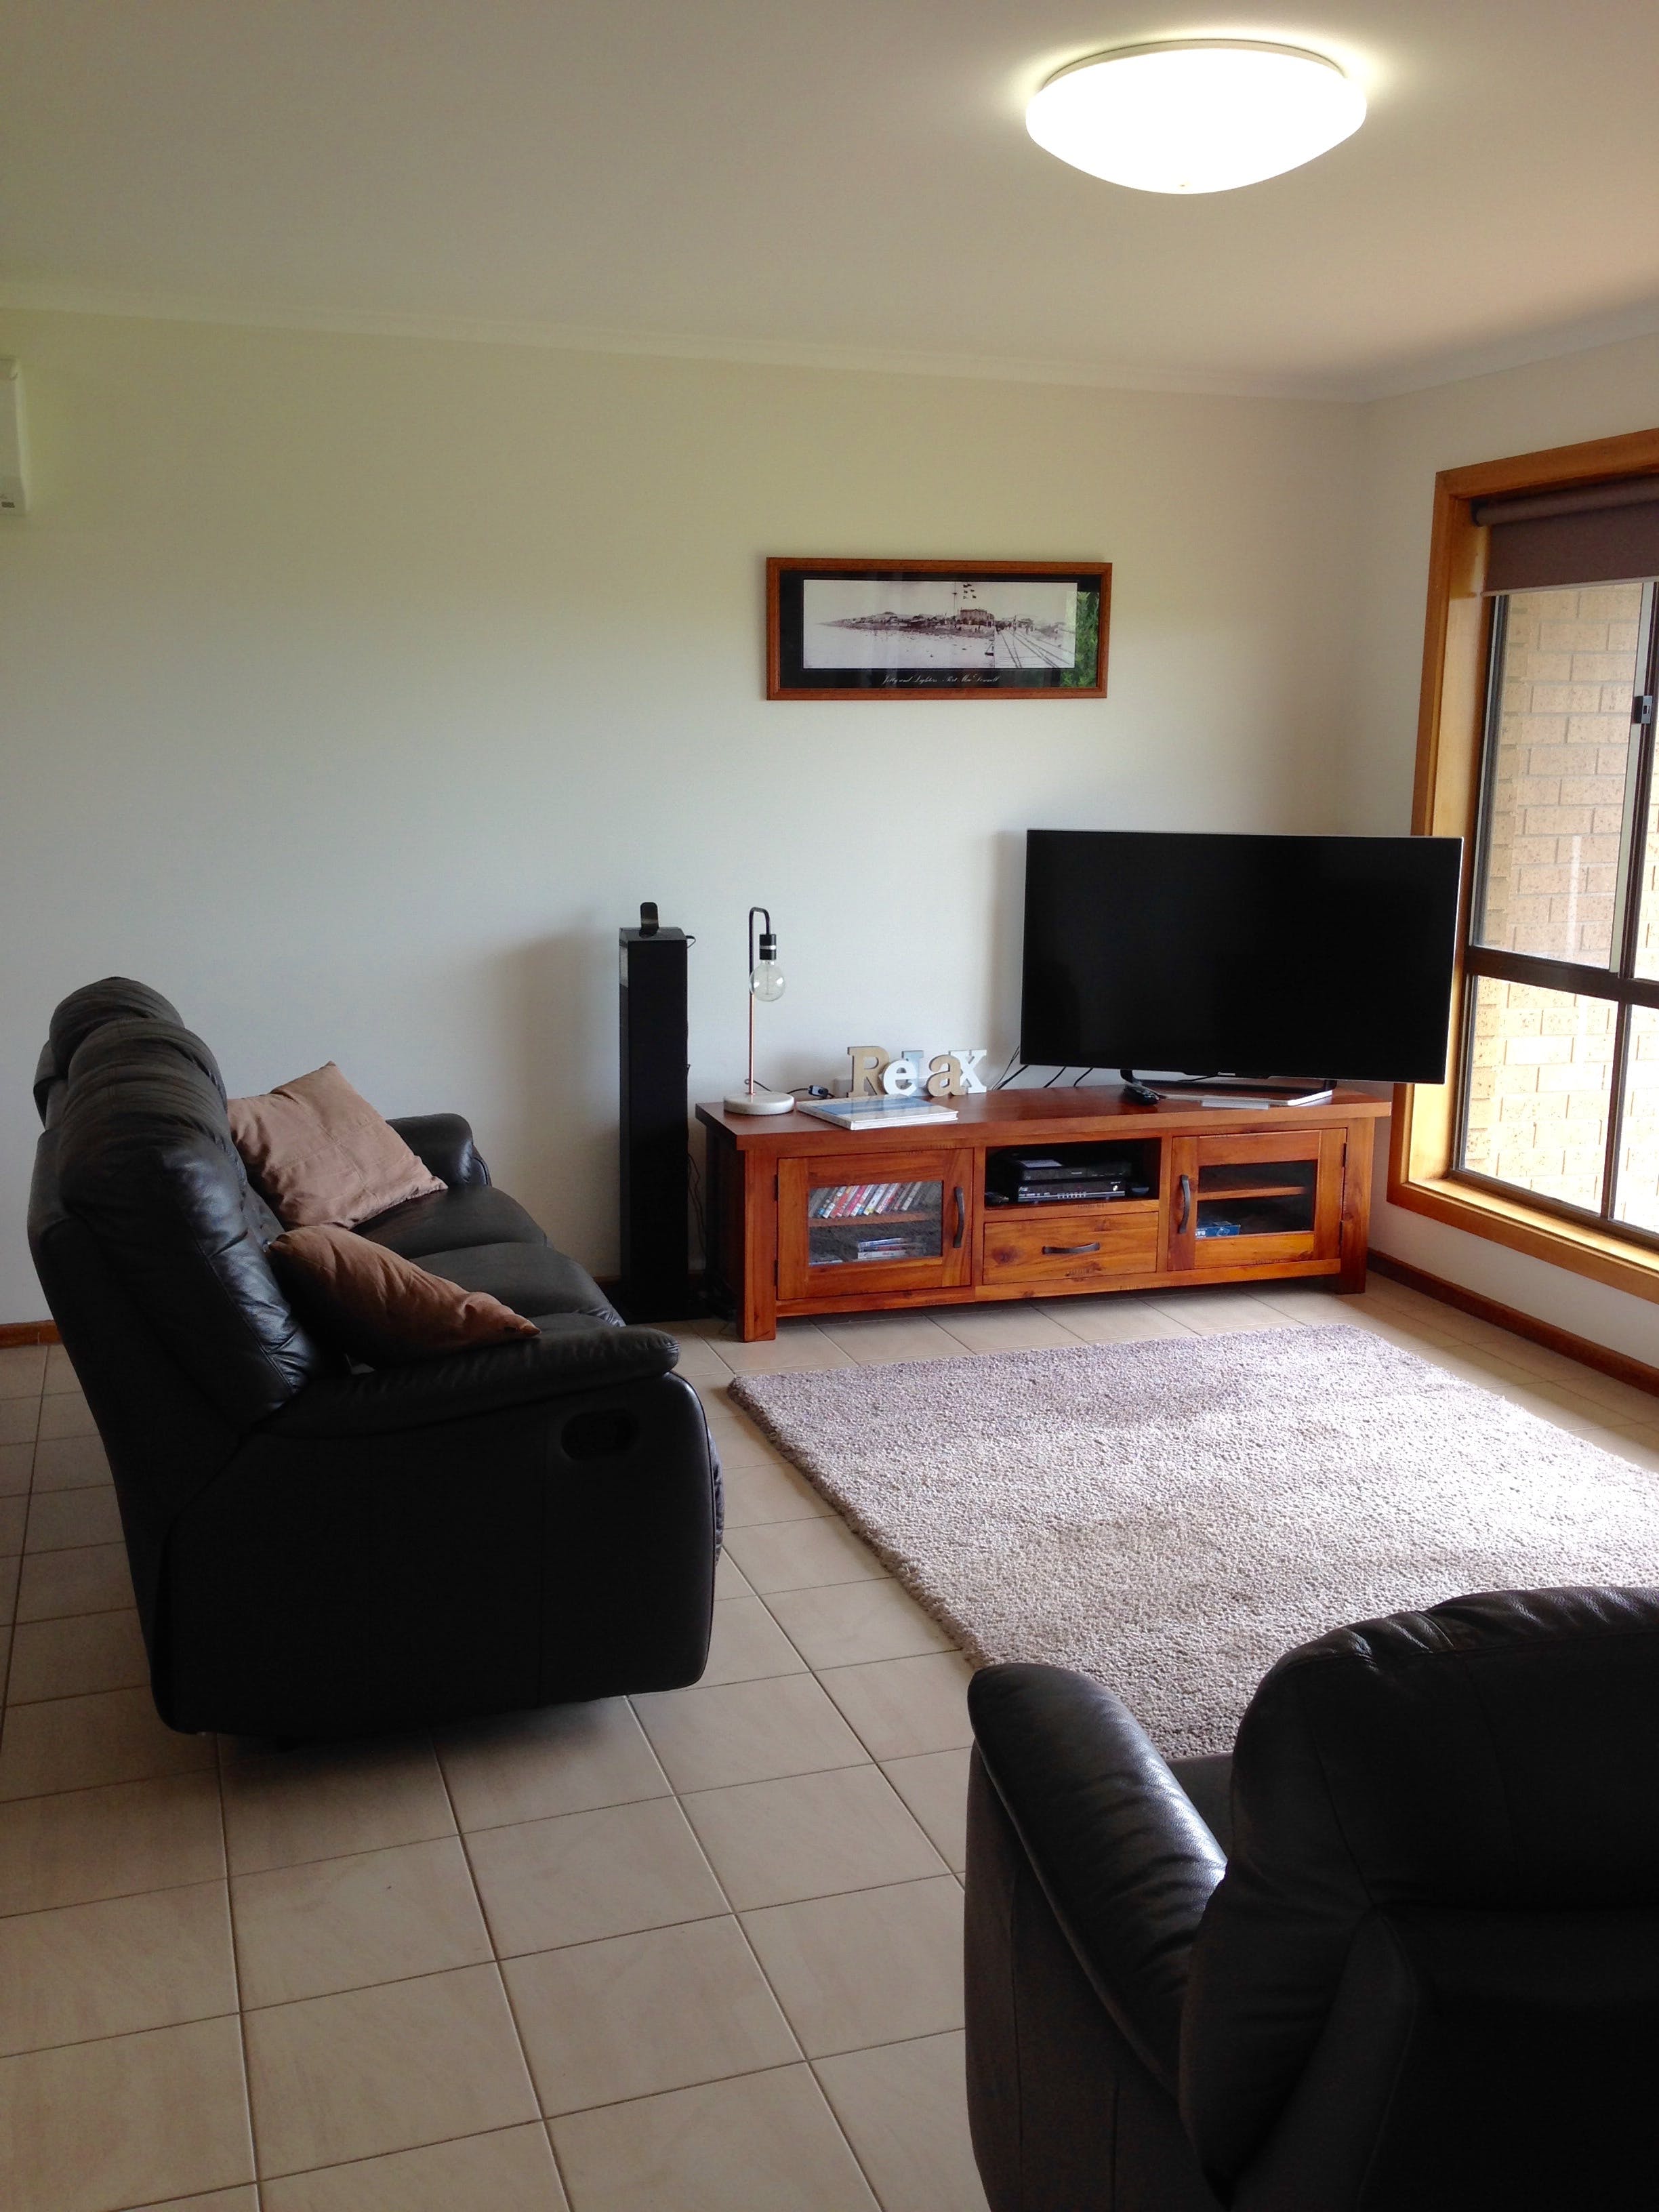 Springs Beach House - Accommodation Directory